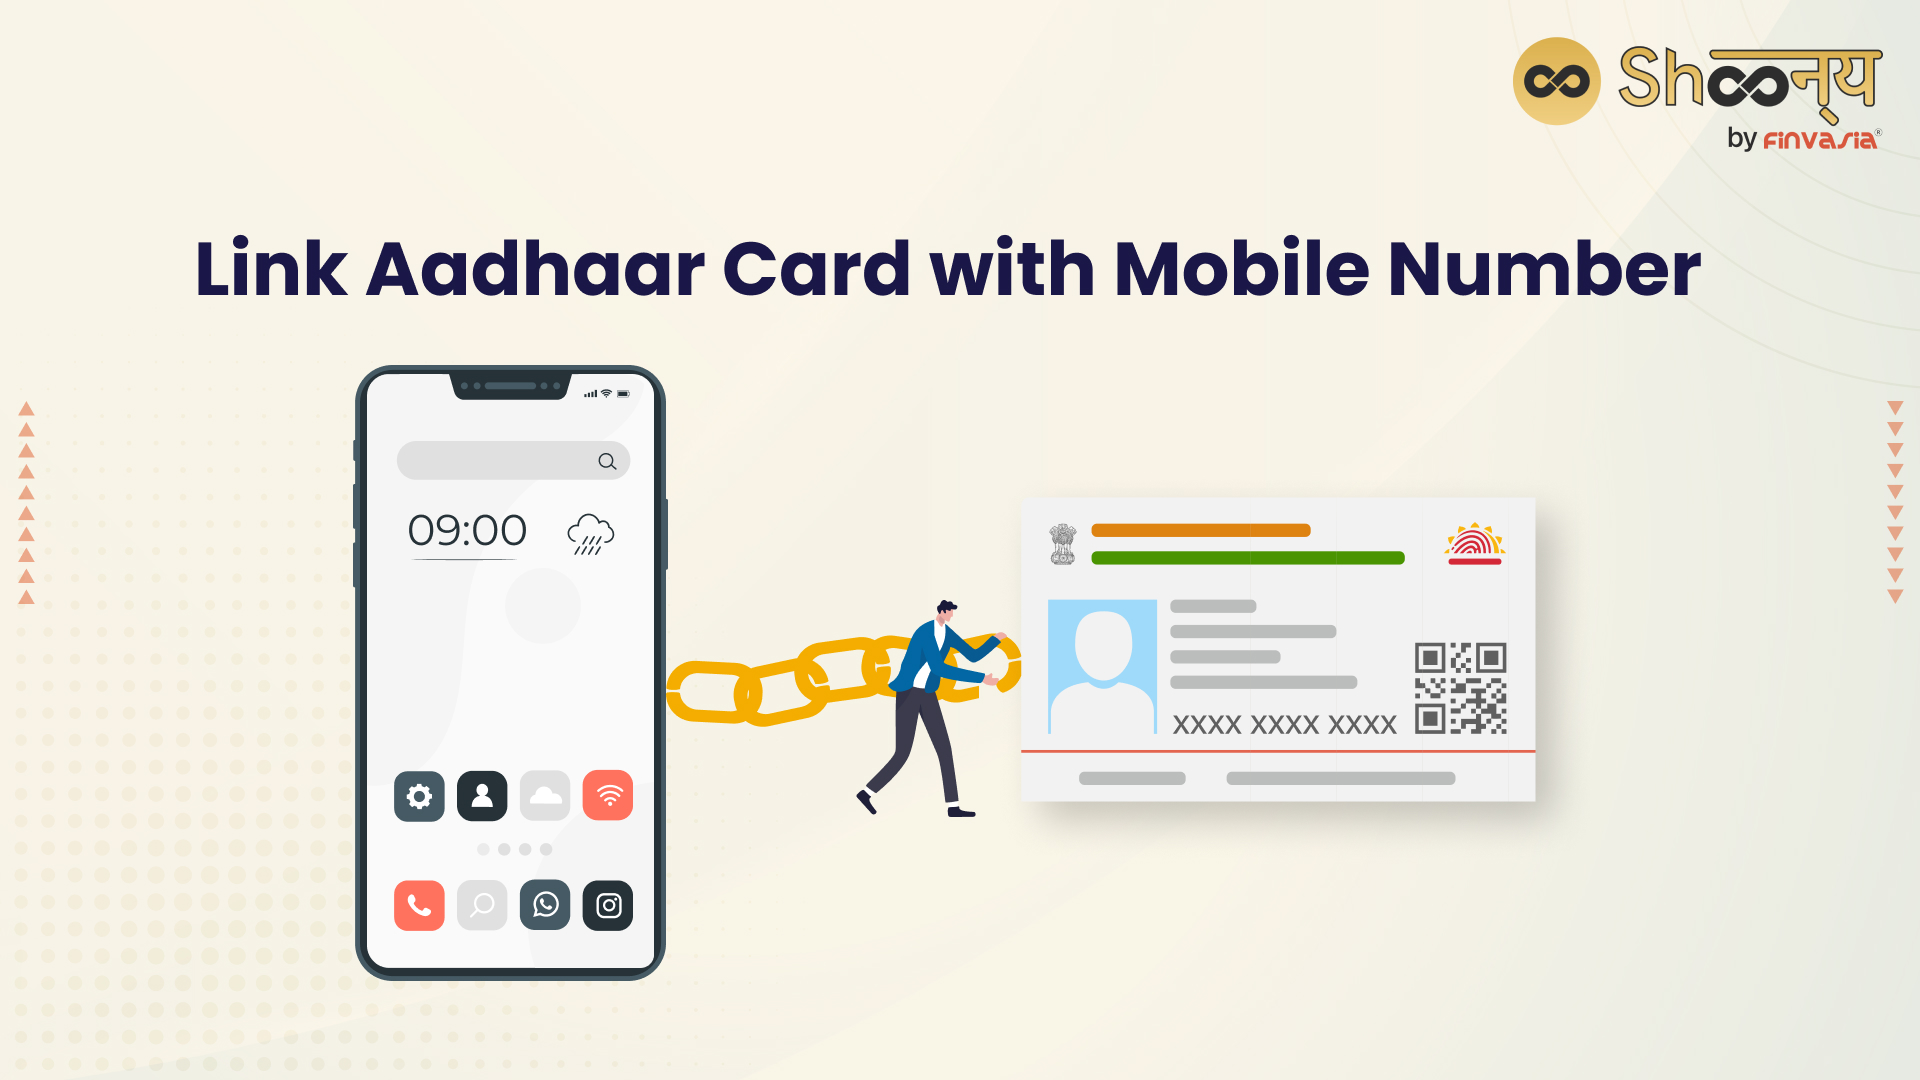 How to Link Aadhaar Card with Mobile Number